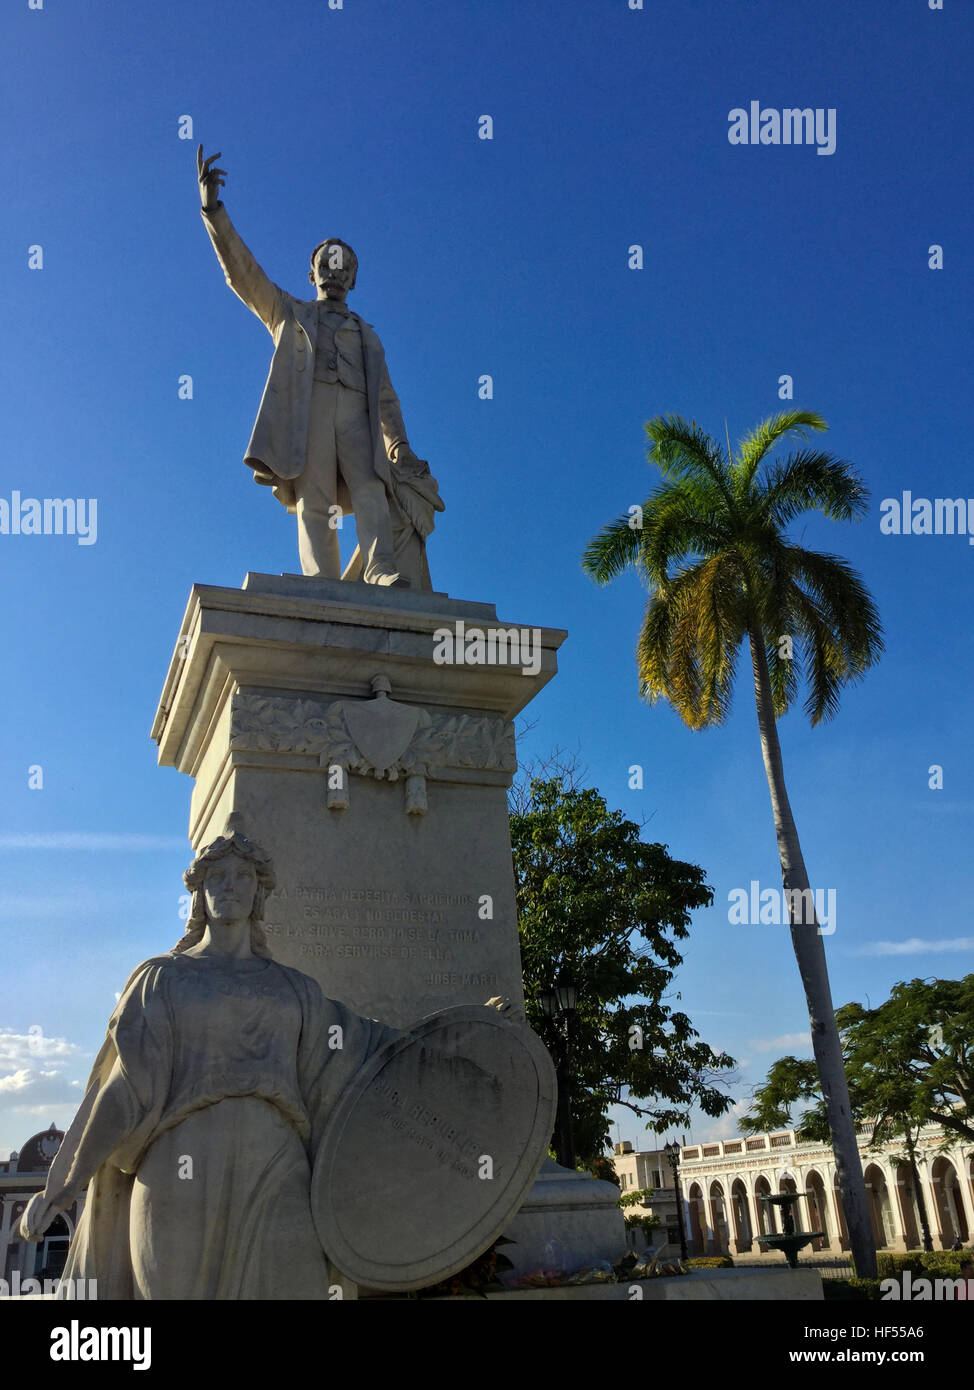 A statue of Jose Marti, one of the national heroes of Cuba, in the central plaza of Cienfuegos, Cuba Stock Photo